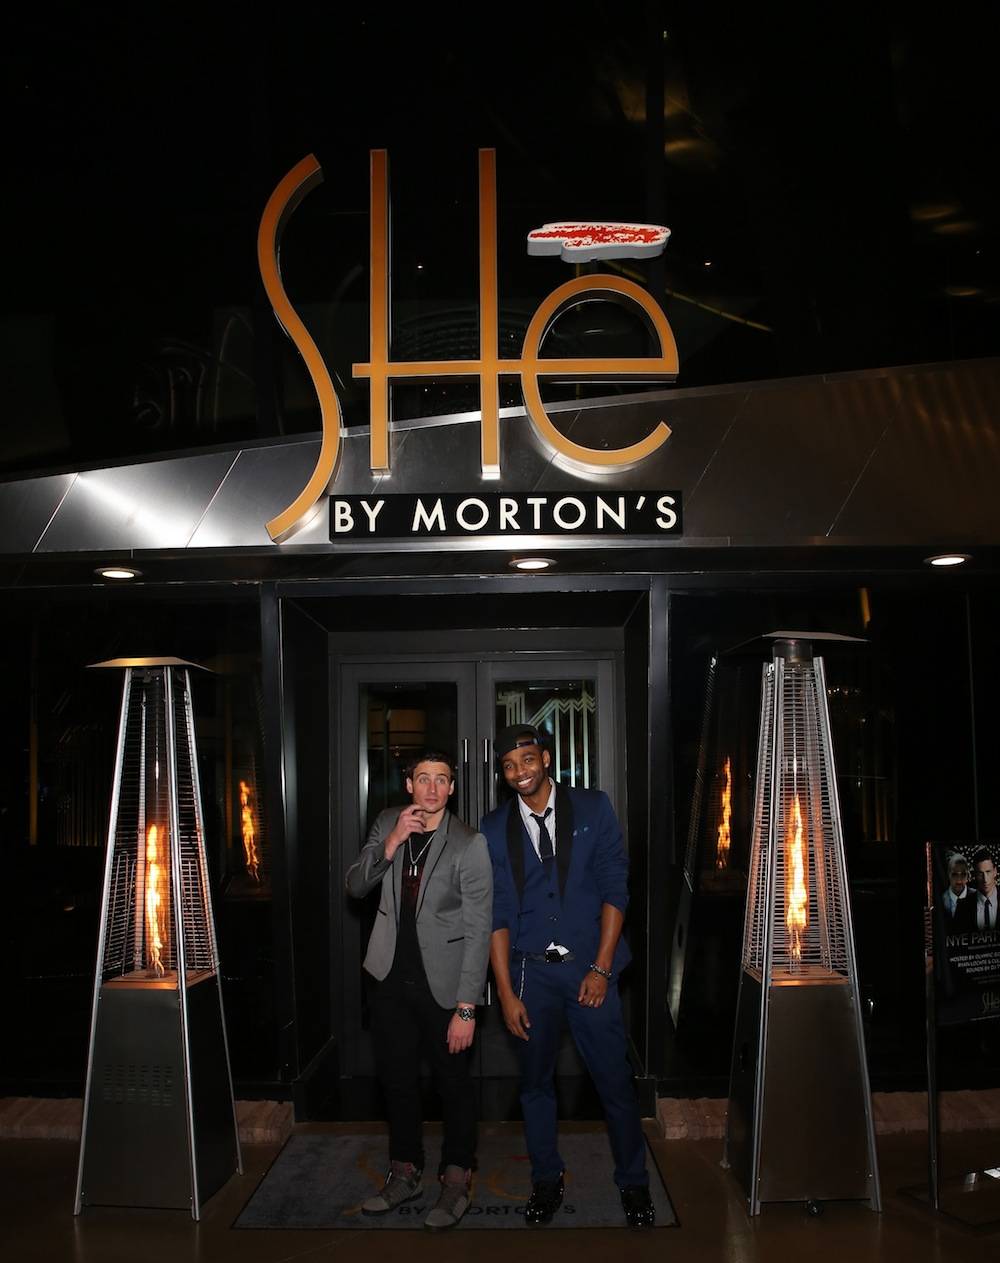 Ryan Lochte and Cullen Jones Celebrate New Year's Eve in Las Vegas at SHe by Morton's